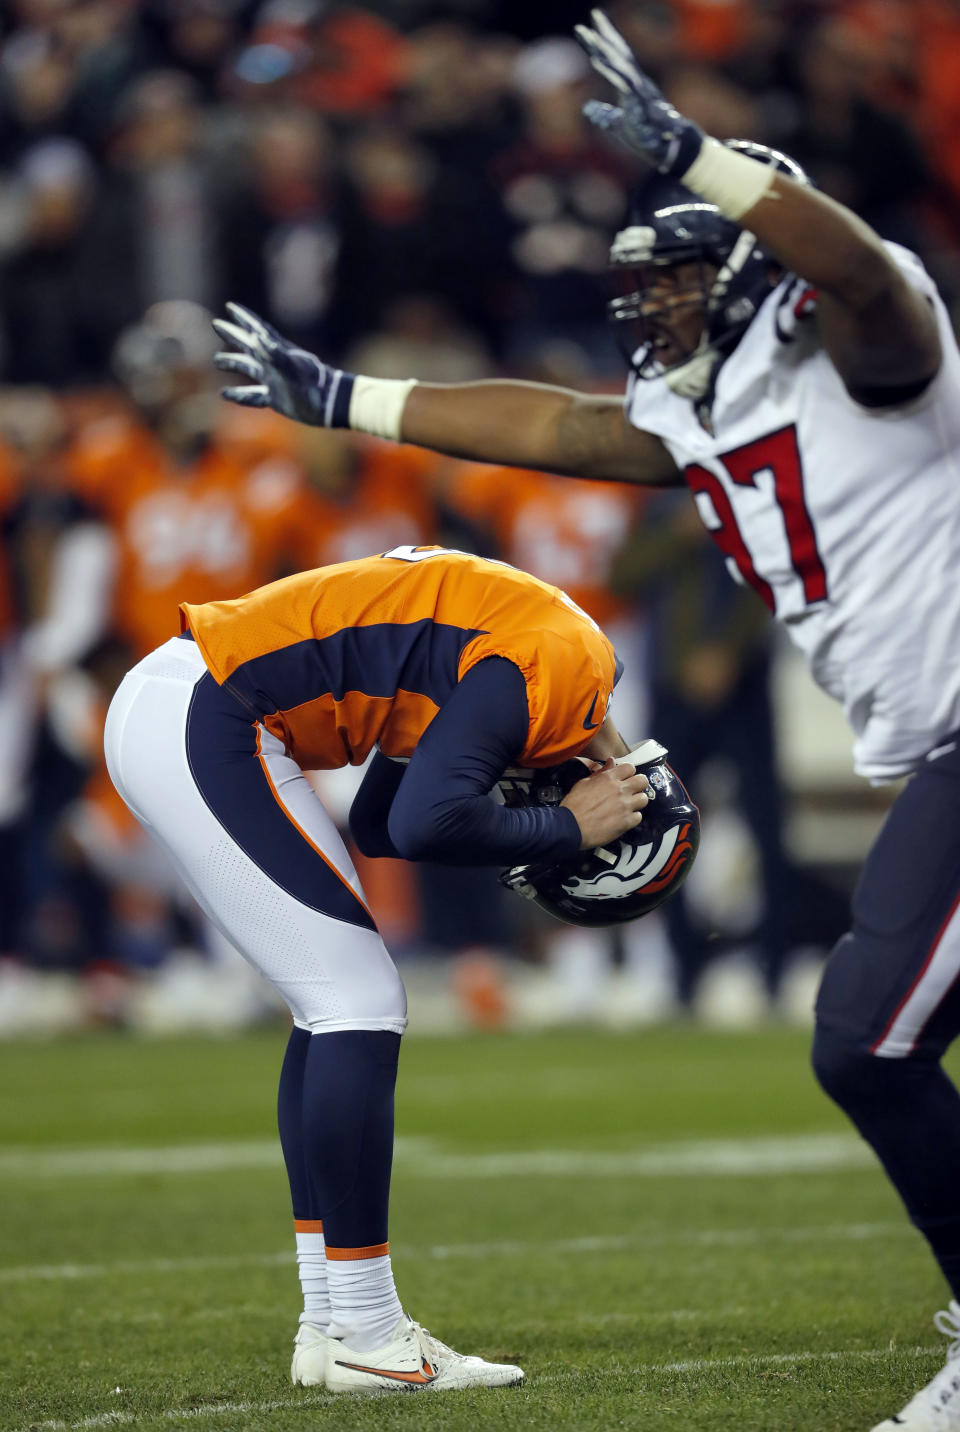 Denver Broncos kicker Brandon McManus hangs his head after missing a game winning field goal attempt as Houston Texans defensive end Angelo Blackson (97) celebrates during the second half of an NFL football game, Sunday, Nov. 4, 2018, in Denver. The Texans won 19-17. (AP Photo/David Zalubowski)